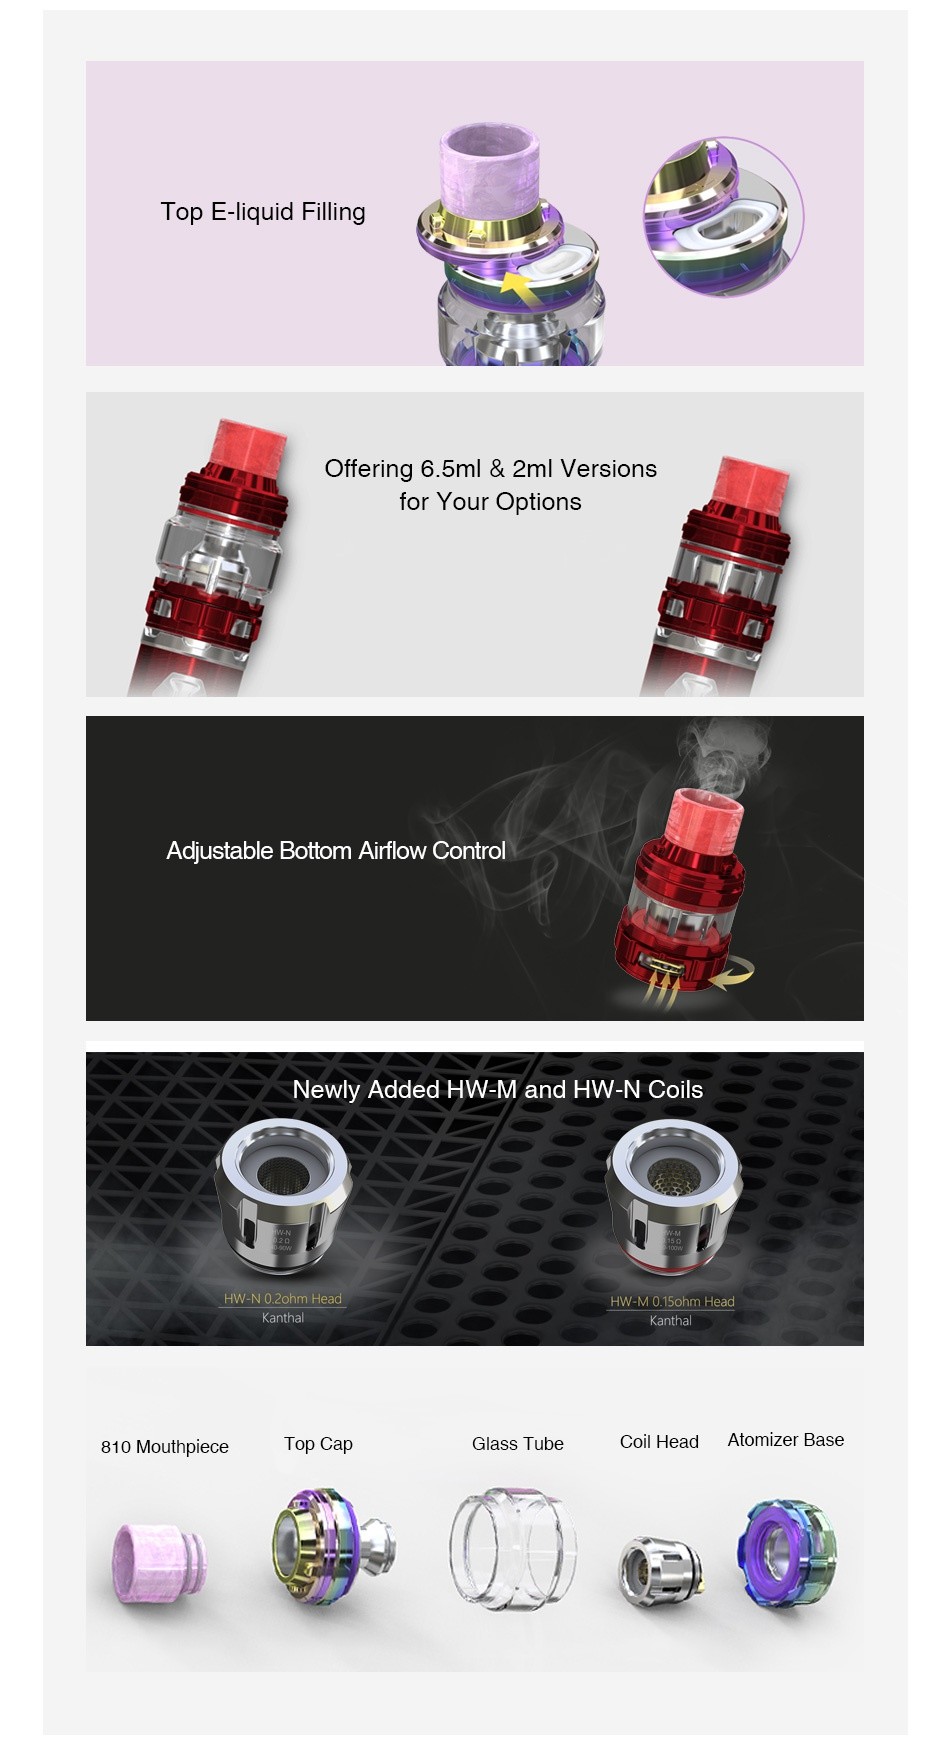 Eleaf ELLO Duro Atomizer 2ml/6.5ml Top E liquid Filling Offering 6 5ml  2ml Versions for Your Options Adjustable Bottom Airflow Control Newly Added HW M and HW N Coils HW N Oohm Head HW M 0 15ohm Head 810 Mouthpiece op cap Glass Tube Coil head Atomizer b